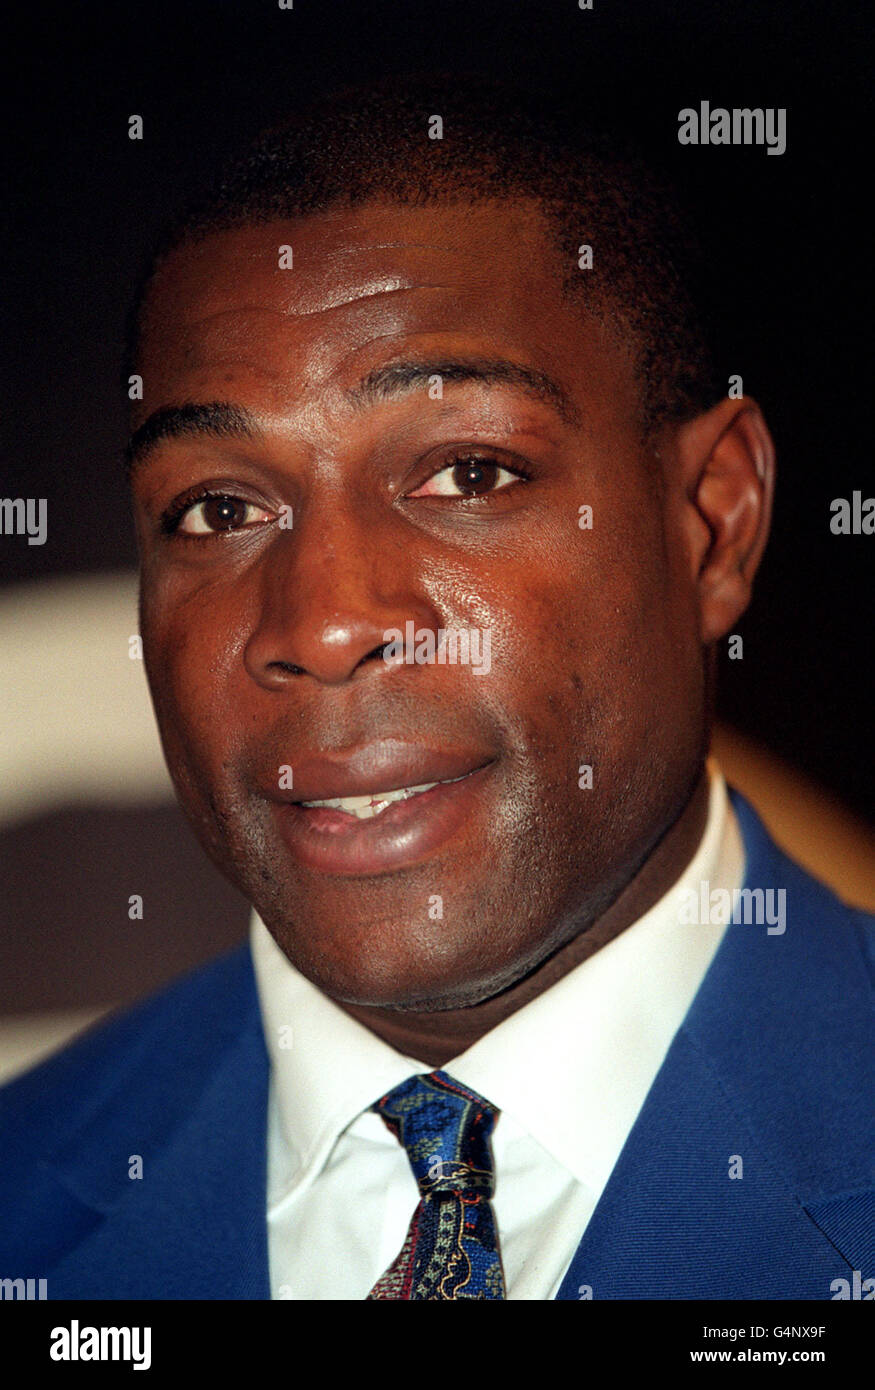 Former heavyweight boxer Frank Bruno at the launch of Channel Five television's autumn programmes schedule, at the Landmark London Hotel, in London. *...27/01/01 Bruno was set to show his softer side by attending the Toy Fair. Organisers said he would be attending the first day of the four-day trade show, at the ExCel Exhibition Centre in London's Royal Docks, to receive a donation for the show's chosen charity at around midday. Toy manufacturers exhibiting at the industry's annual showcase have clubbed together to give toys worth around 25,000 for Children with Leukaemia. Stock Photo